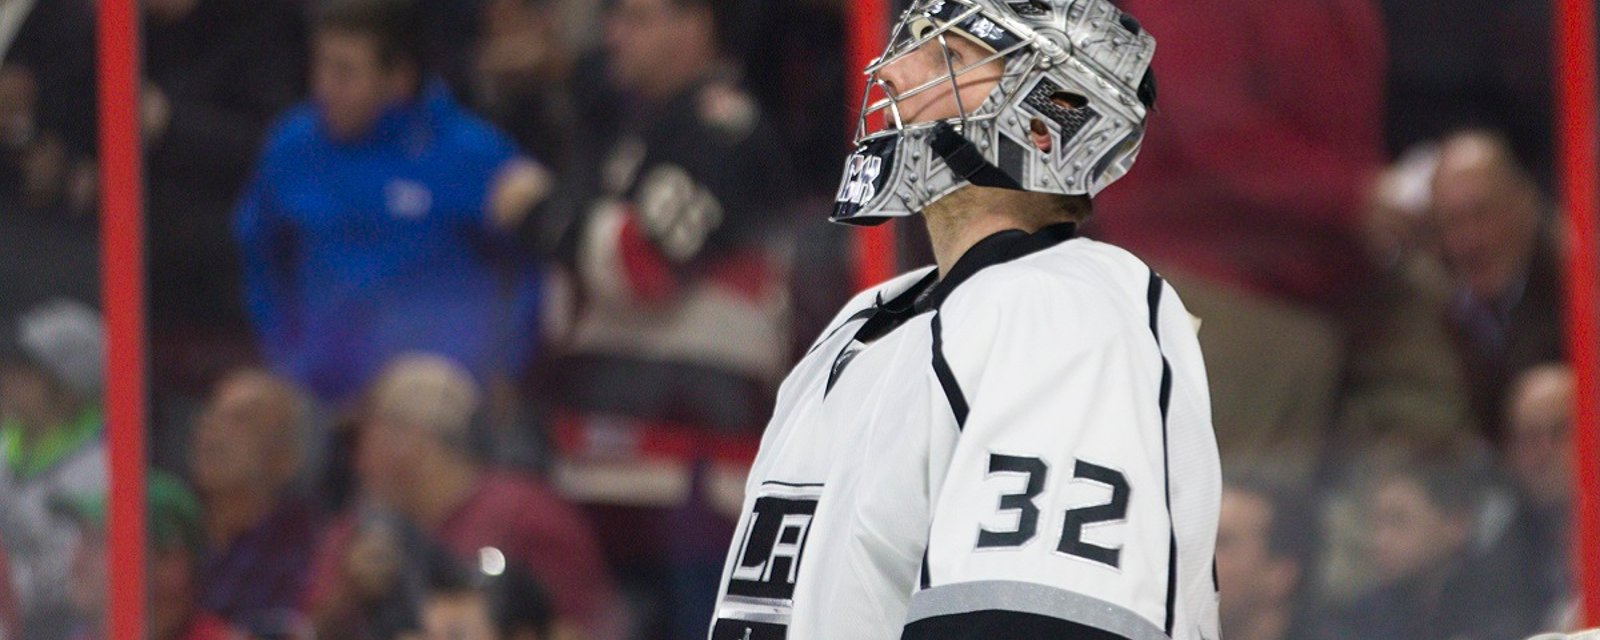 The latest update on Jonathan Quick does not sound good at all.